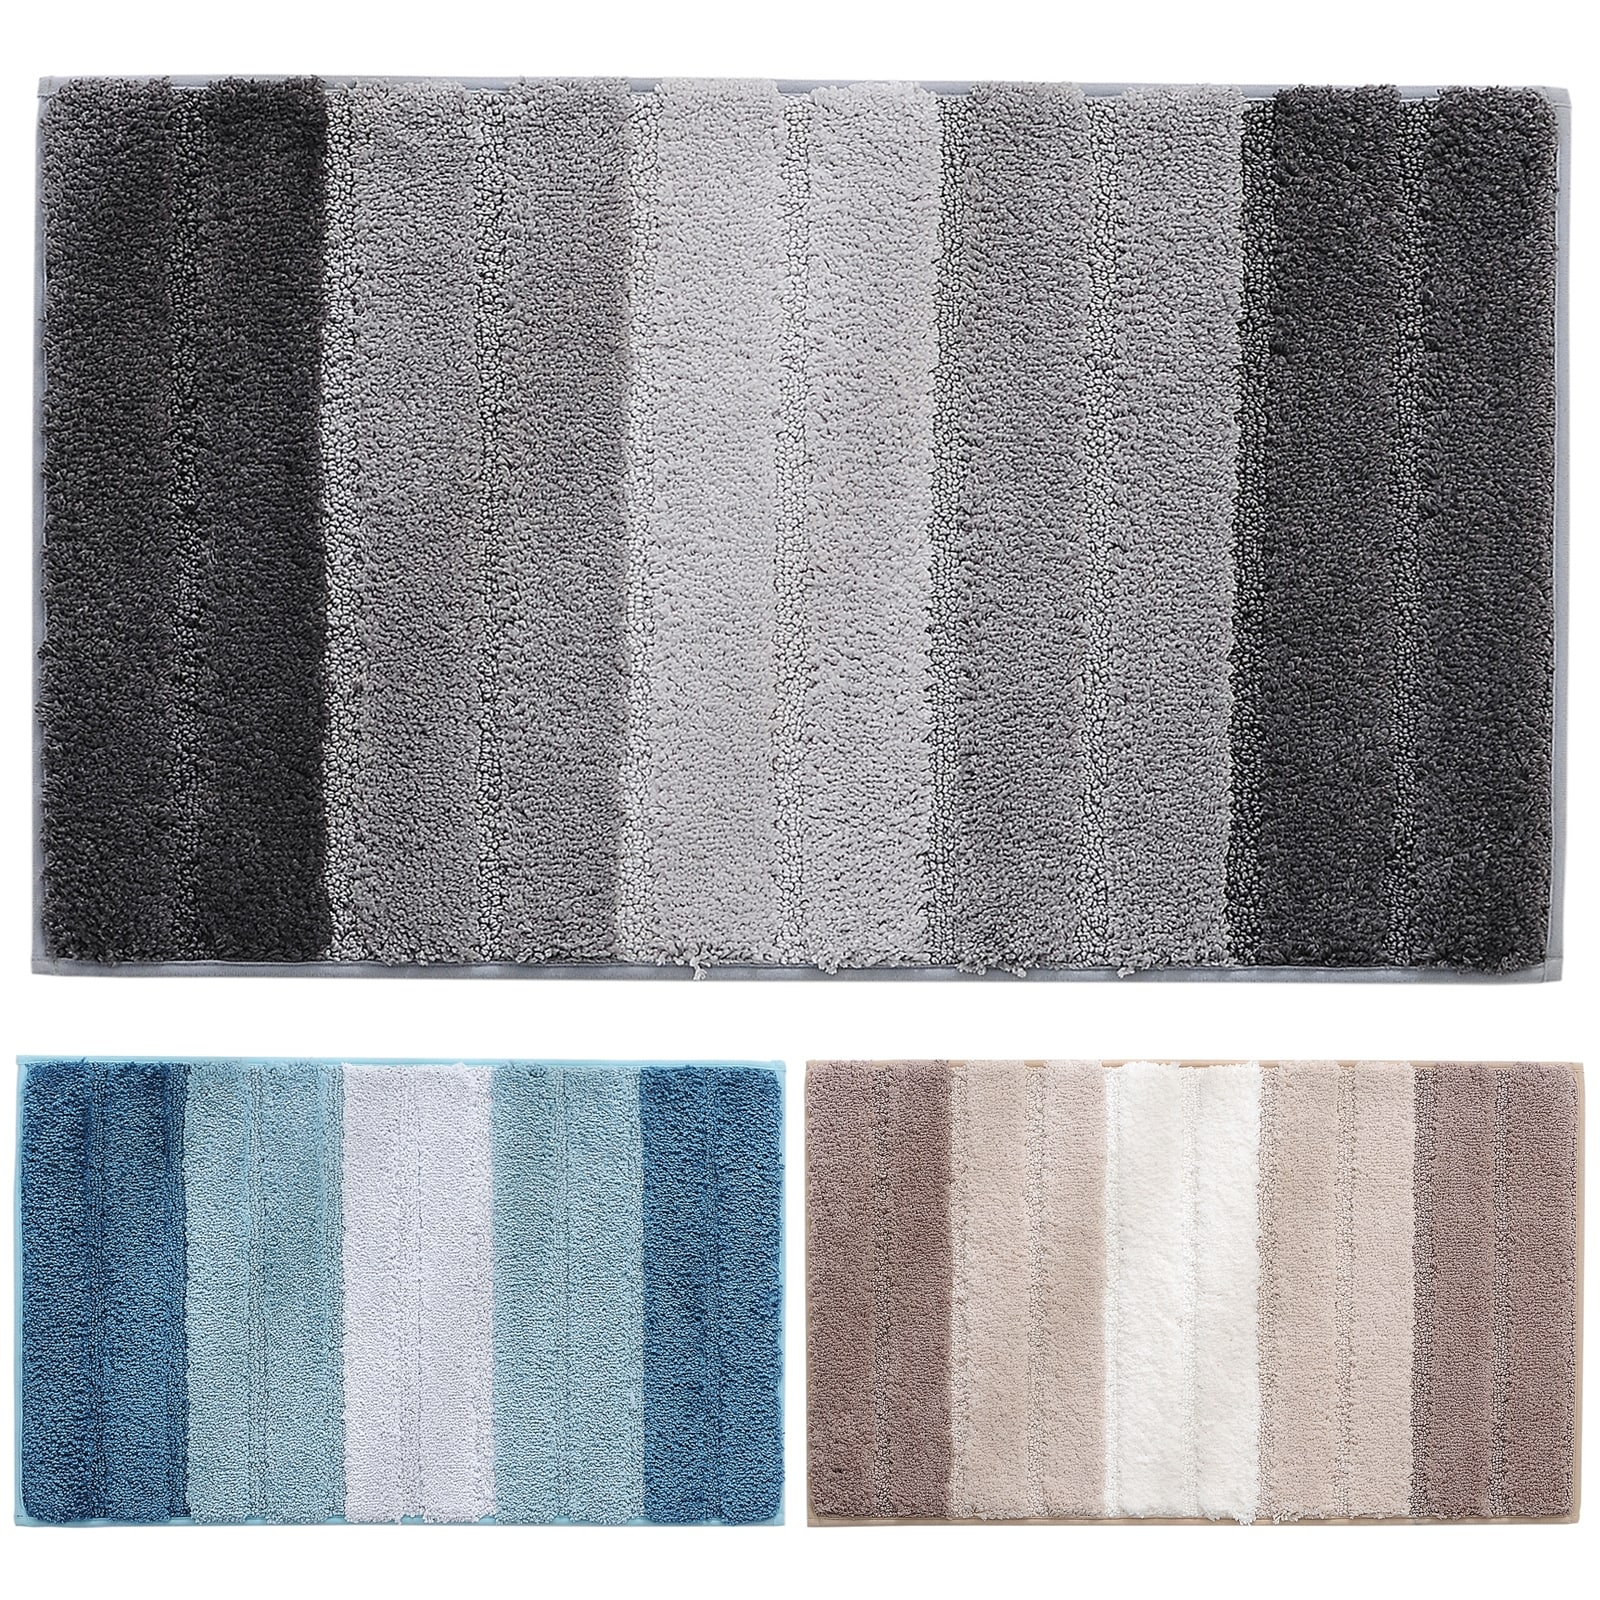 https://ak1.ostkcdn.com/images/products/is/images/direct/542c534220427967c2783a432b640898ed4142a7/Striped-Bath-Rugs-Bathroom-Mat-Water-Absorbent-Non-Slip-Backing-Pads.jpg